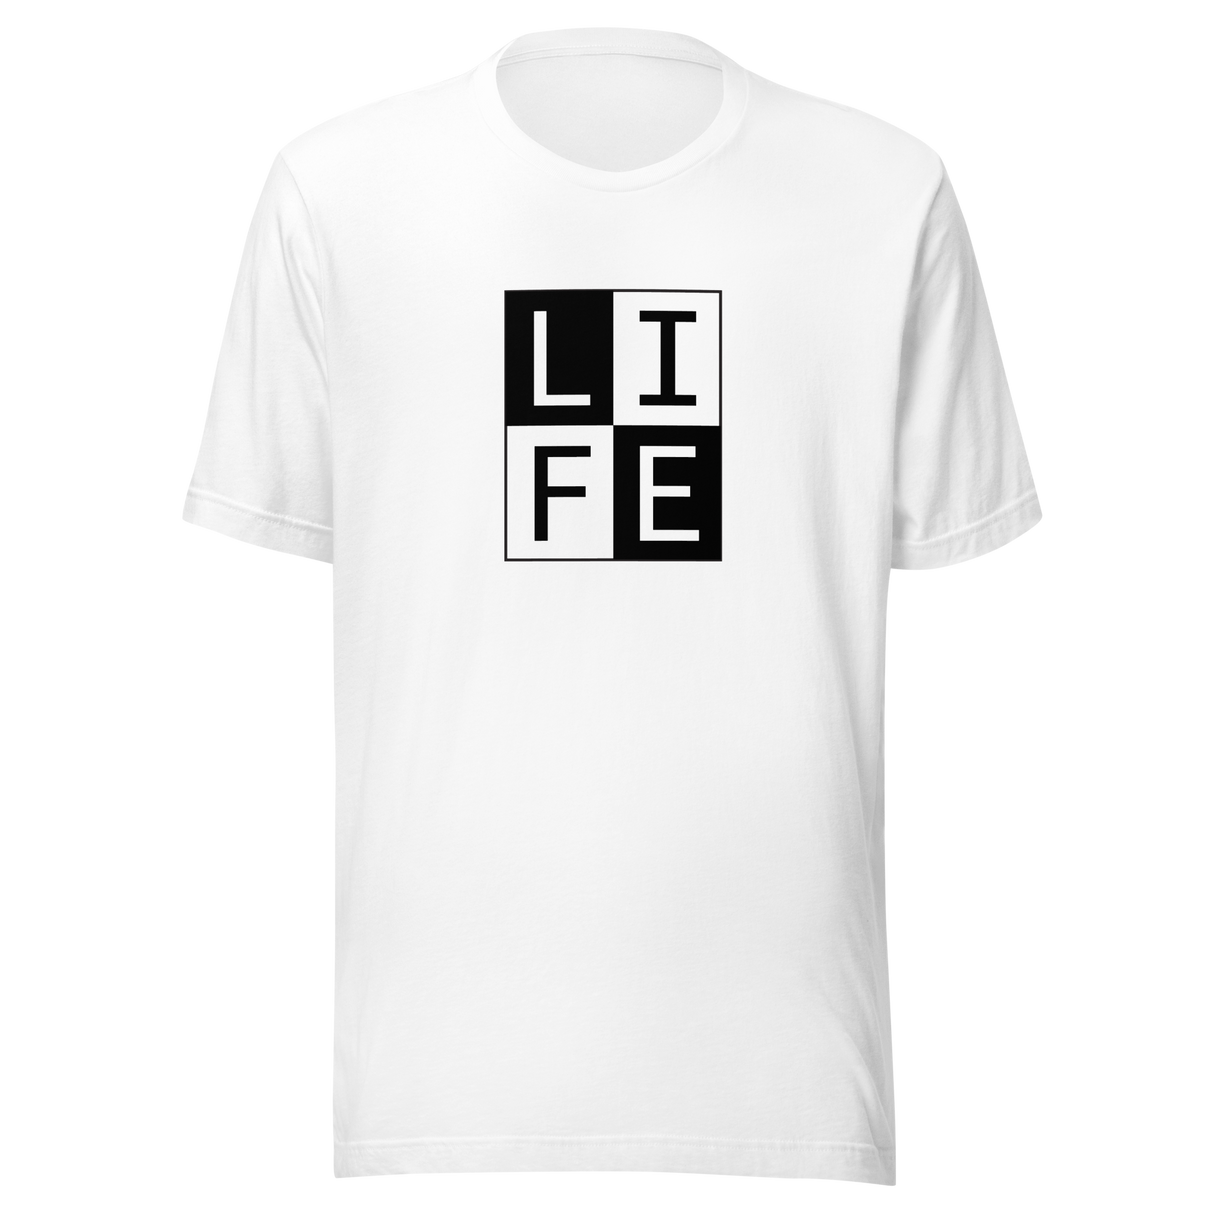 life-square-outline-white-on-black-life-tee-letters-t-shirt-blocks-tee-life-t-shirt-tee#color_white